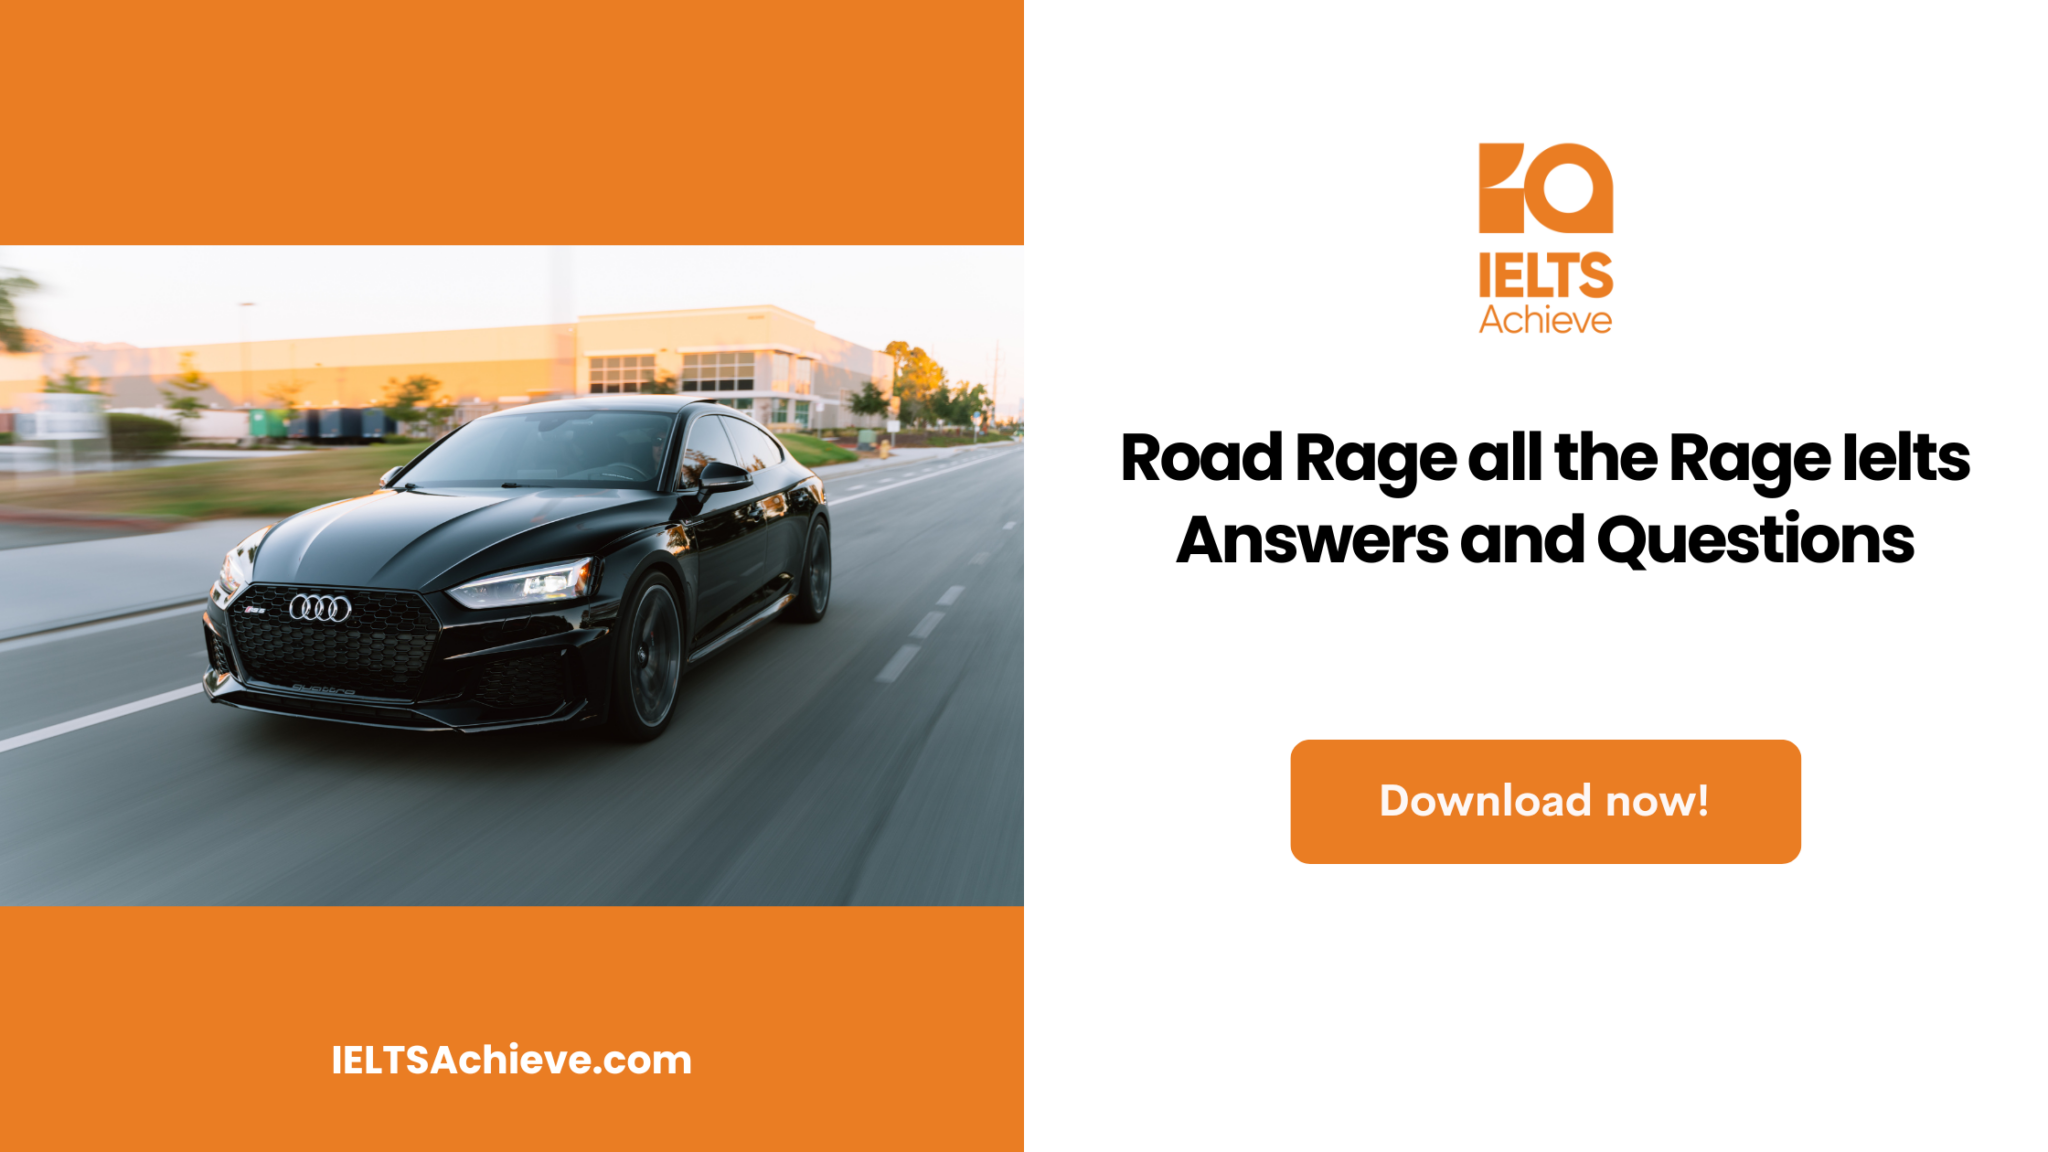 Road Rage all the Rage Ielts Answers and Questions